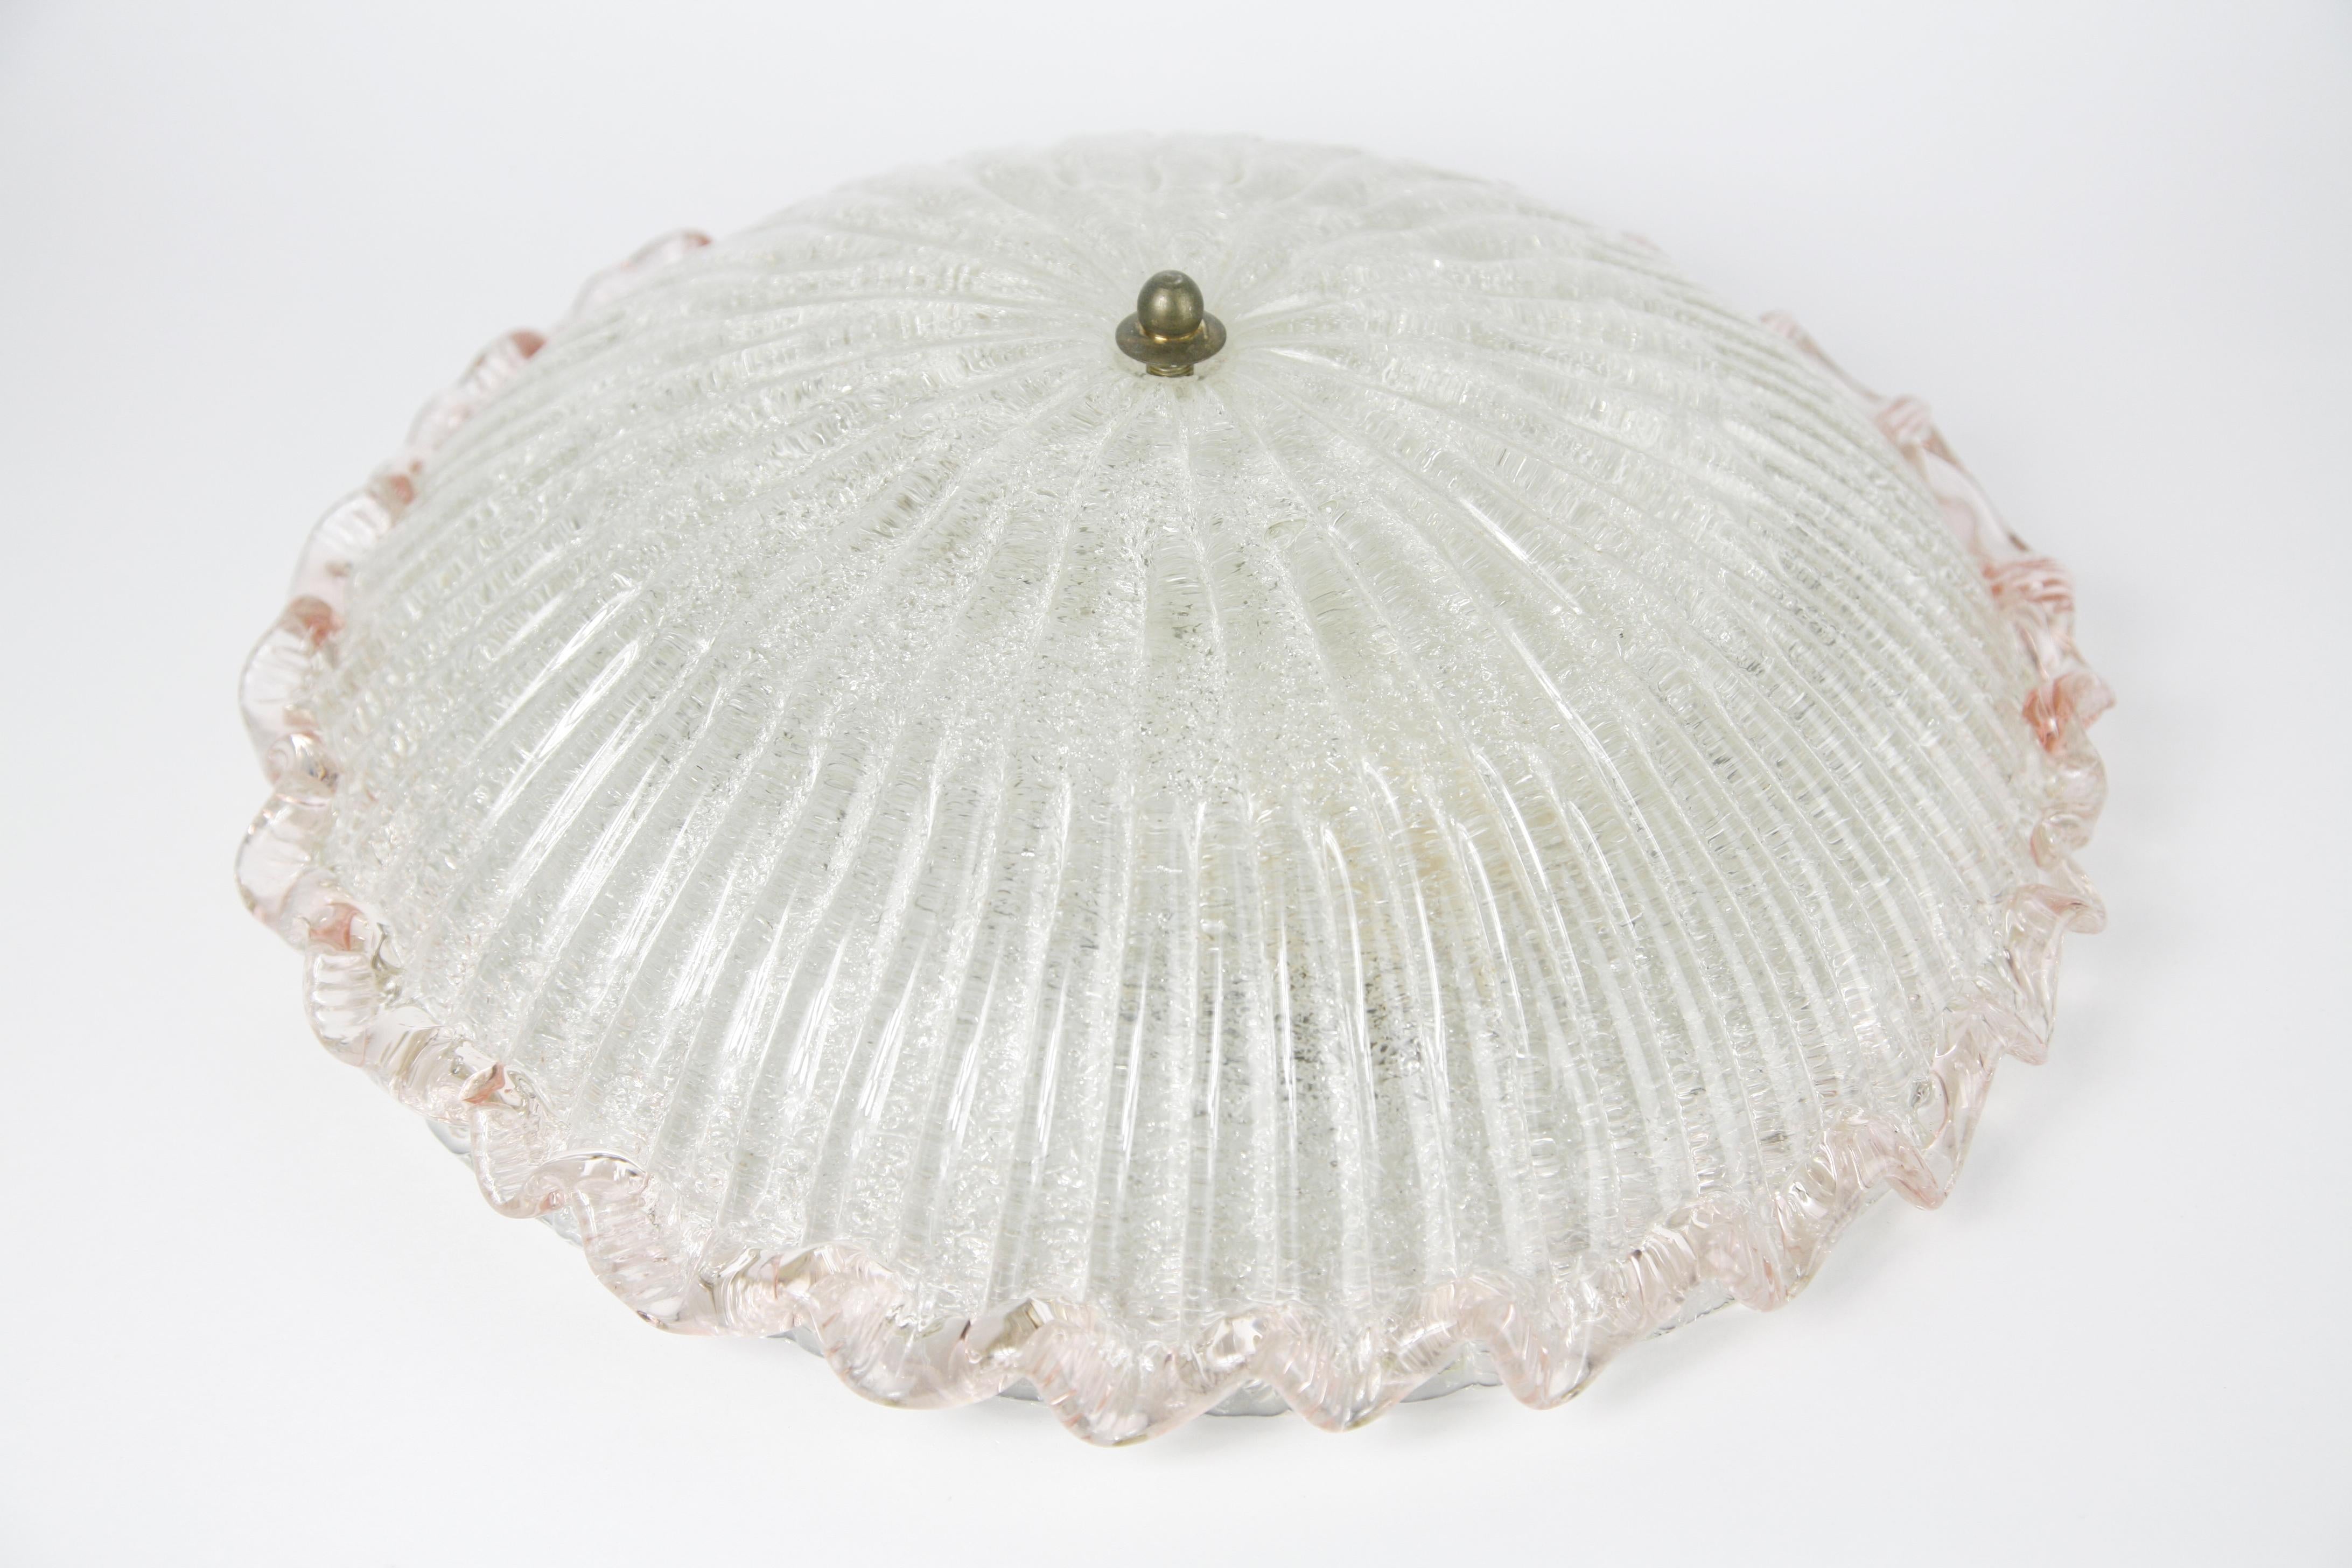 1950s Val Saint Lambert flush mount ceiling plate is white metal with 2 European sockets the shade is a dome shaped pressed glass that is clear with glass flakes on the inside of the dome which gives an effect in the glass the outer edge is pink